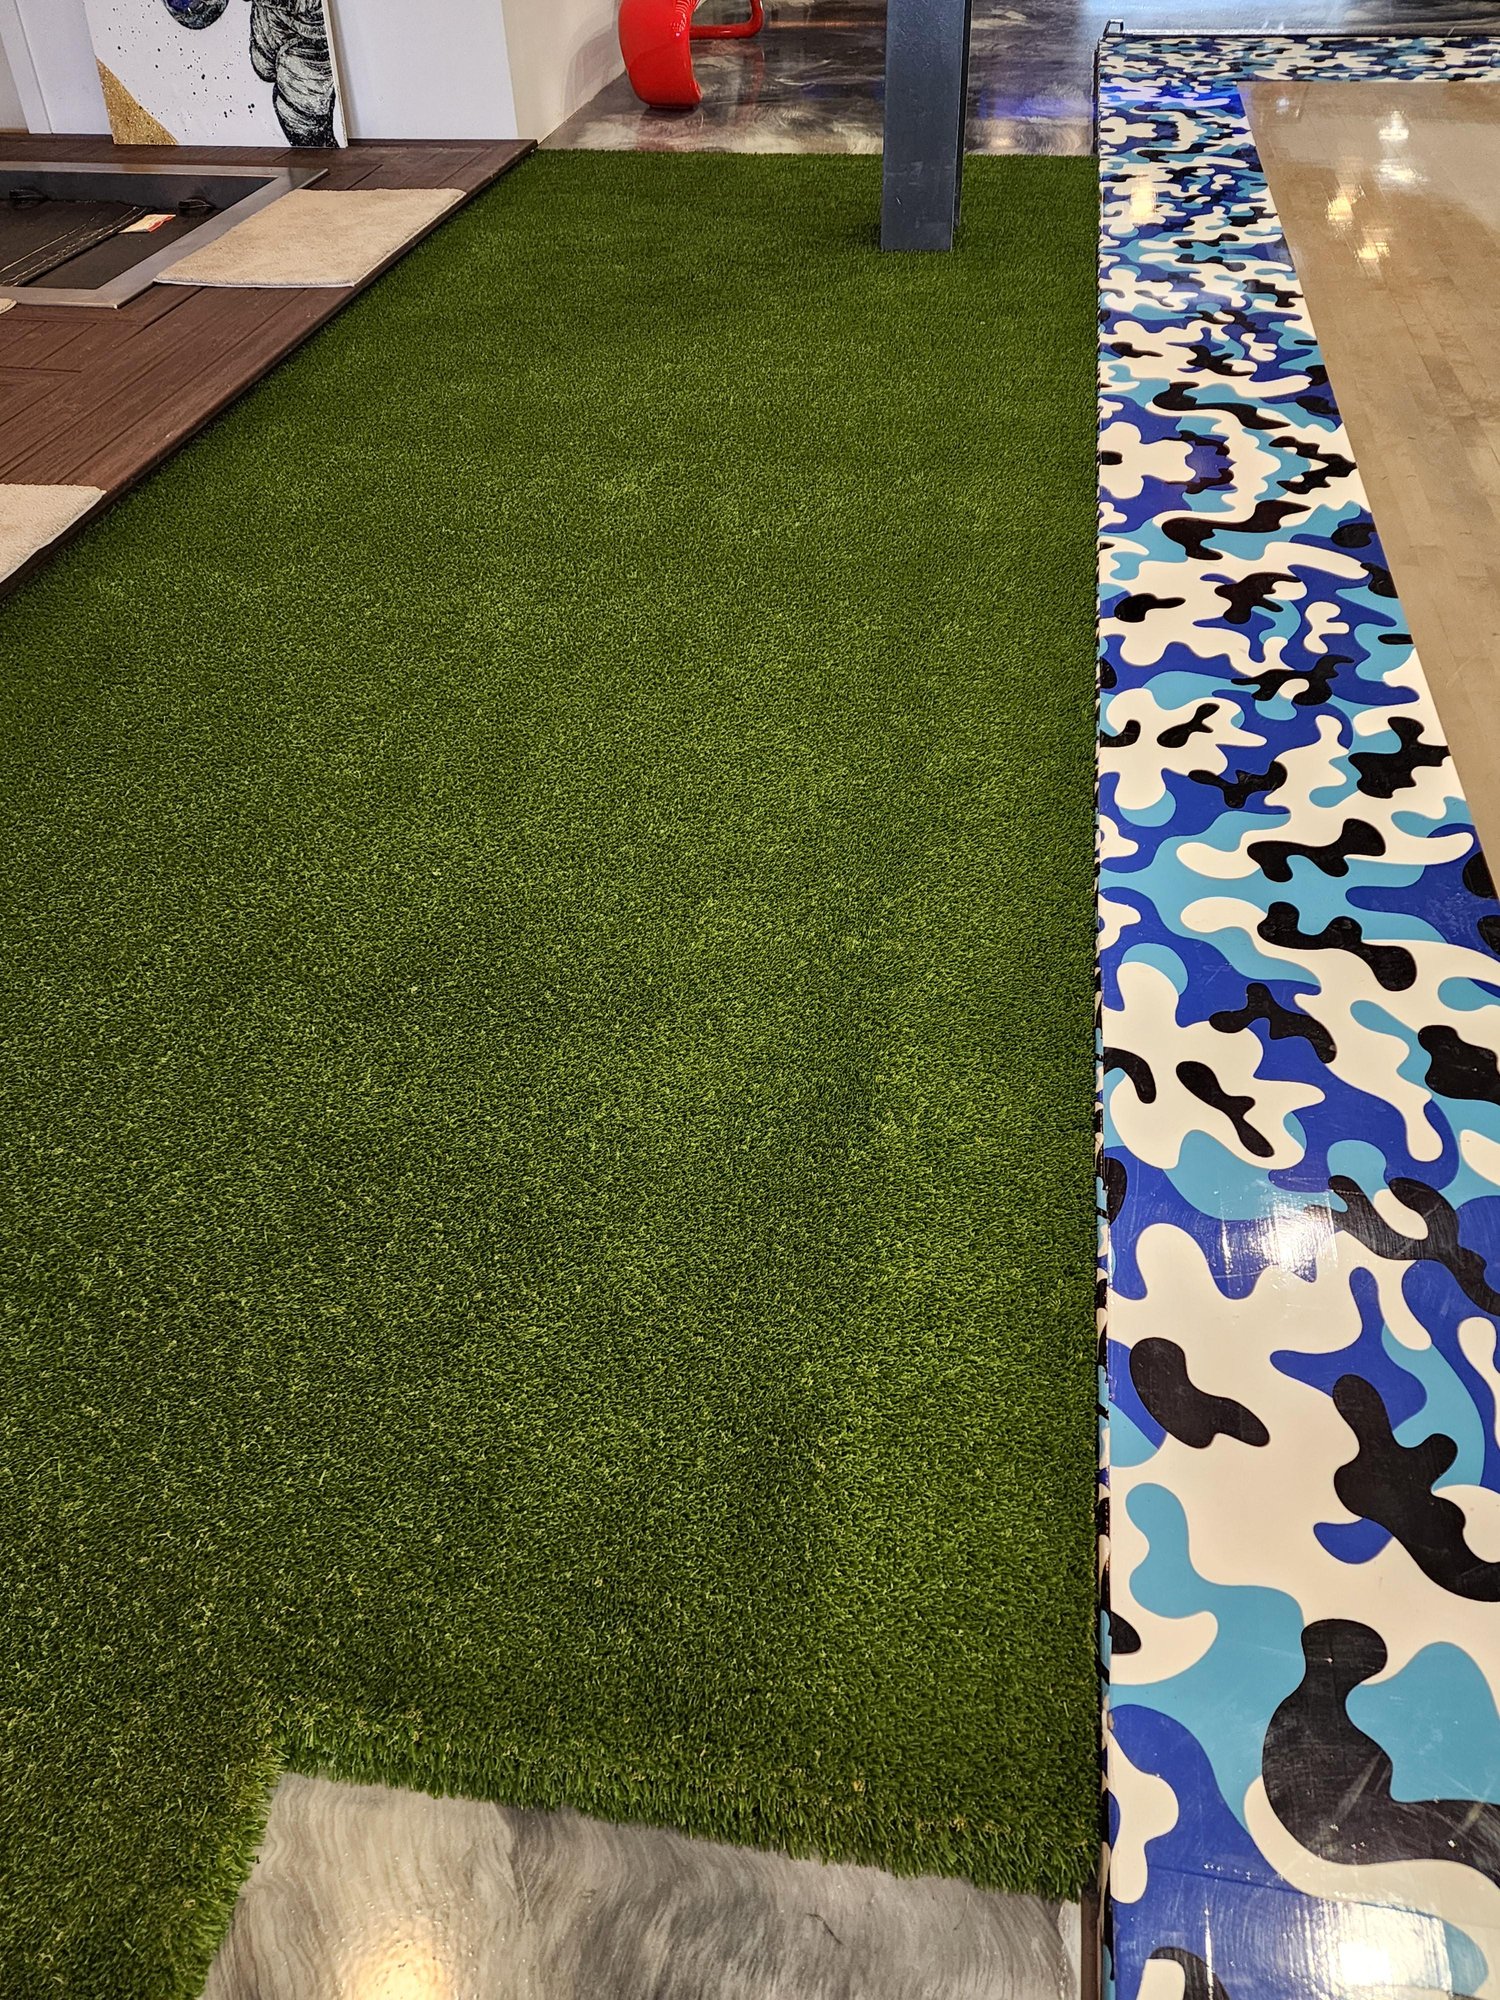 Indoor turf in a gym